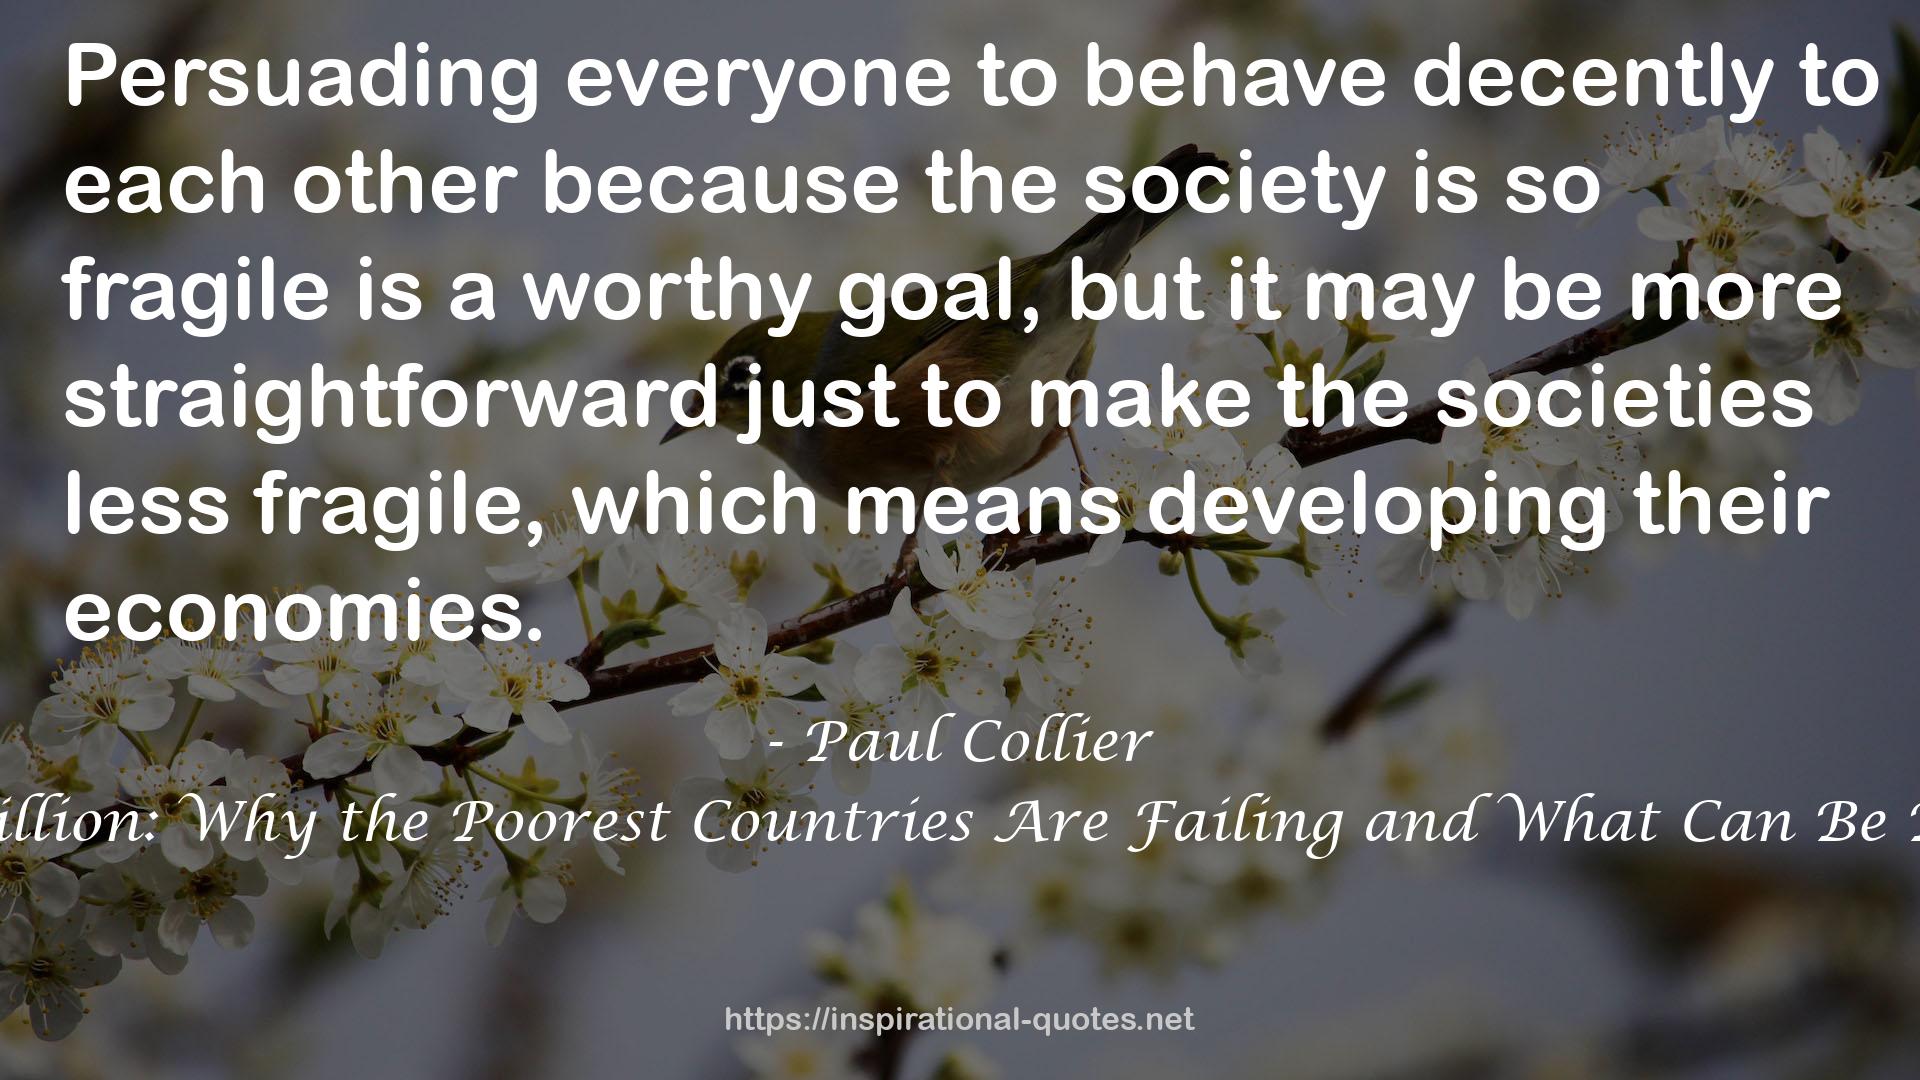 The Bottom Billion: Why the Poorest Countries Are Failing and What Can Be Done About It QUOTES